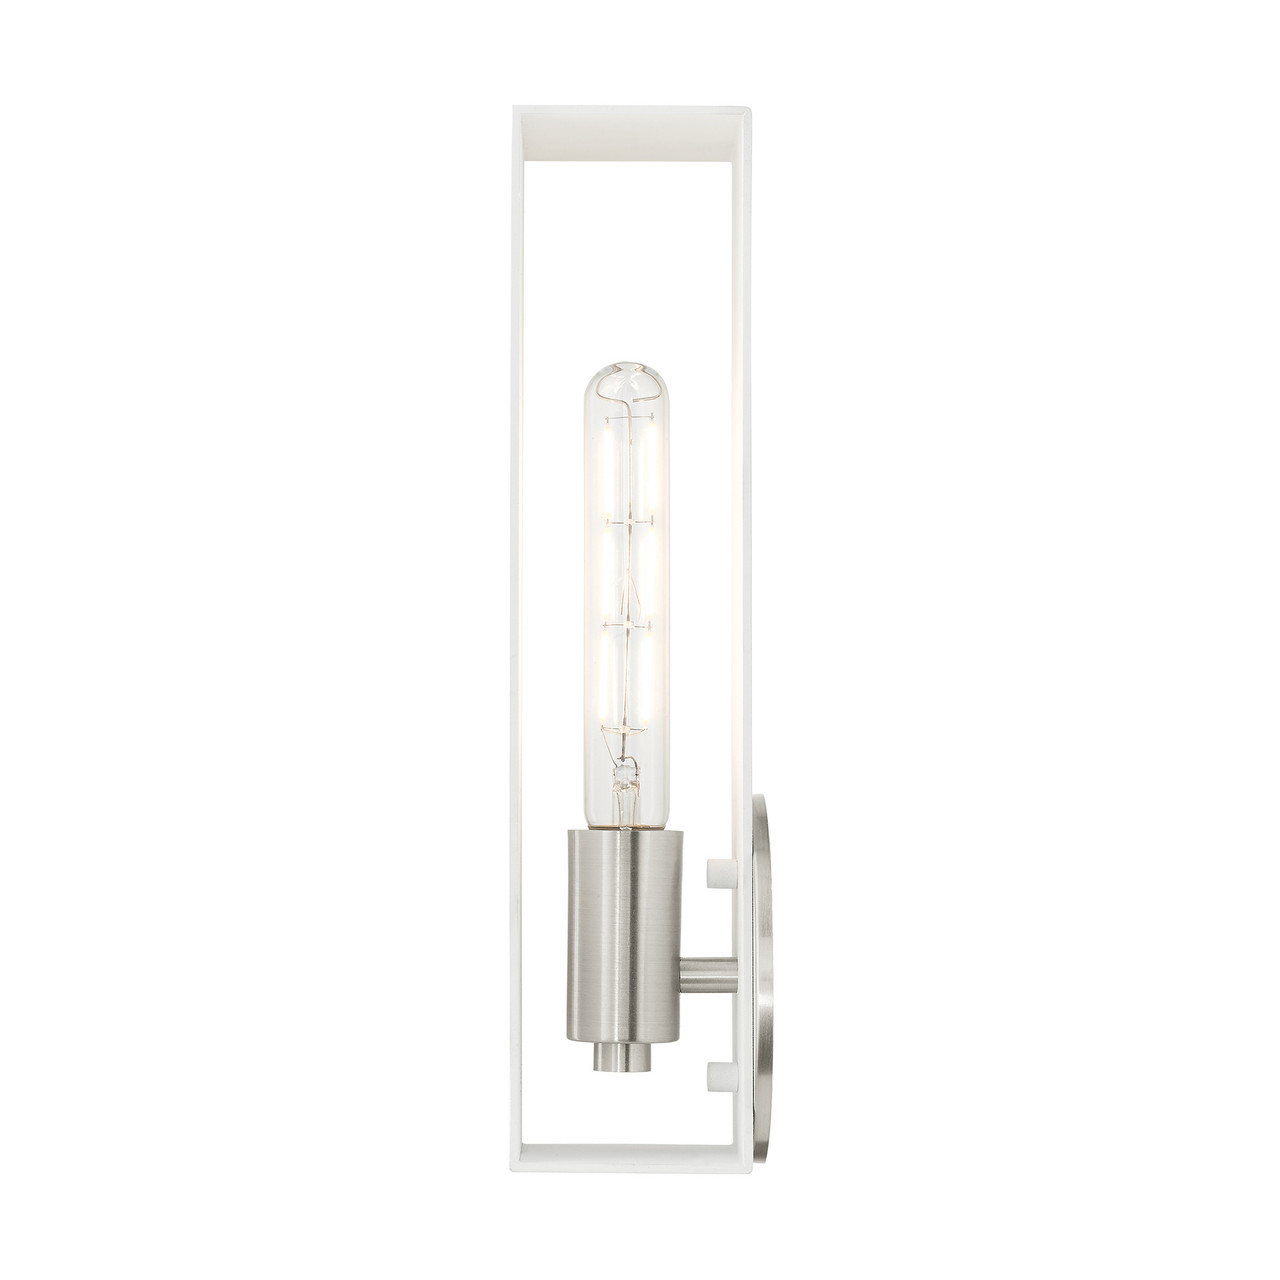 LIVEX LIGHTING 45953-13 1 Light Textured White with Brushed Nickel Finish Accents